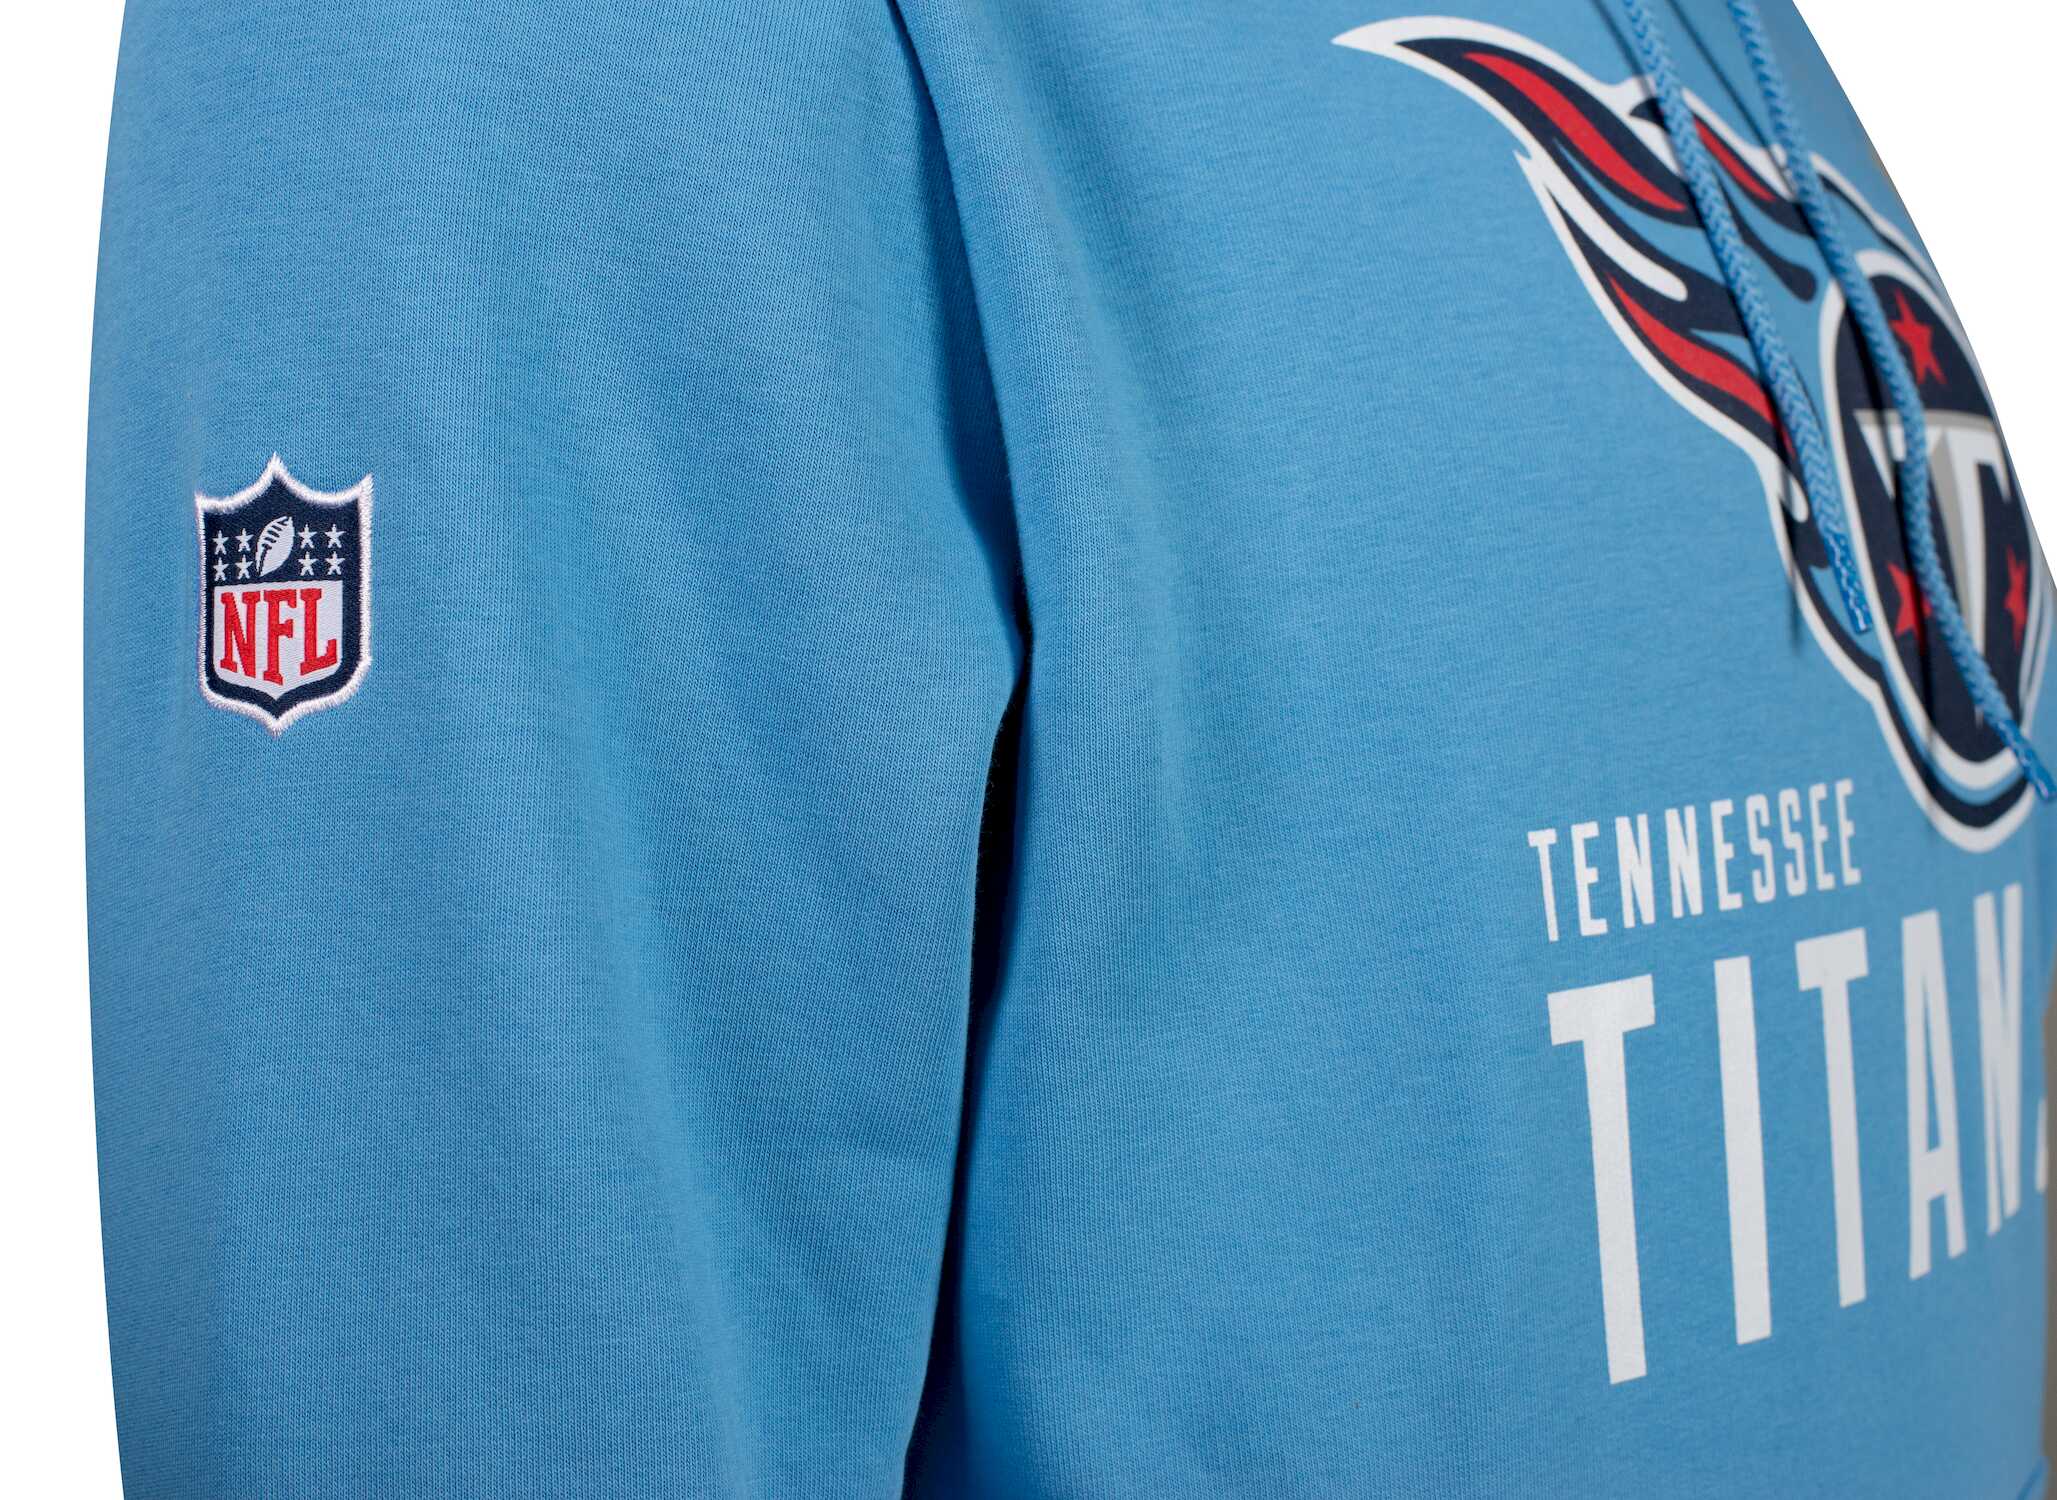 New Era - NFL Tennessee Titans Team Logo and Name Hoodie